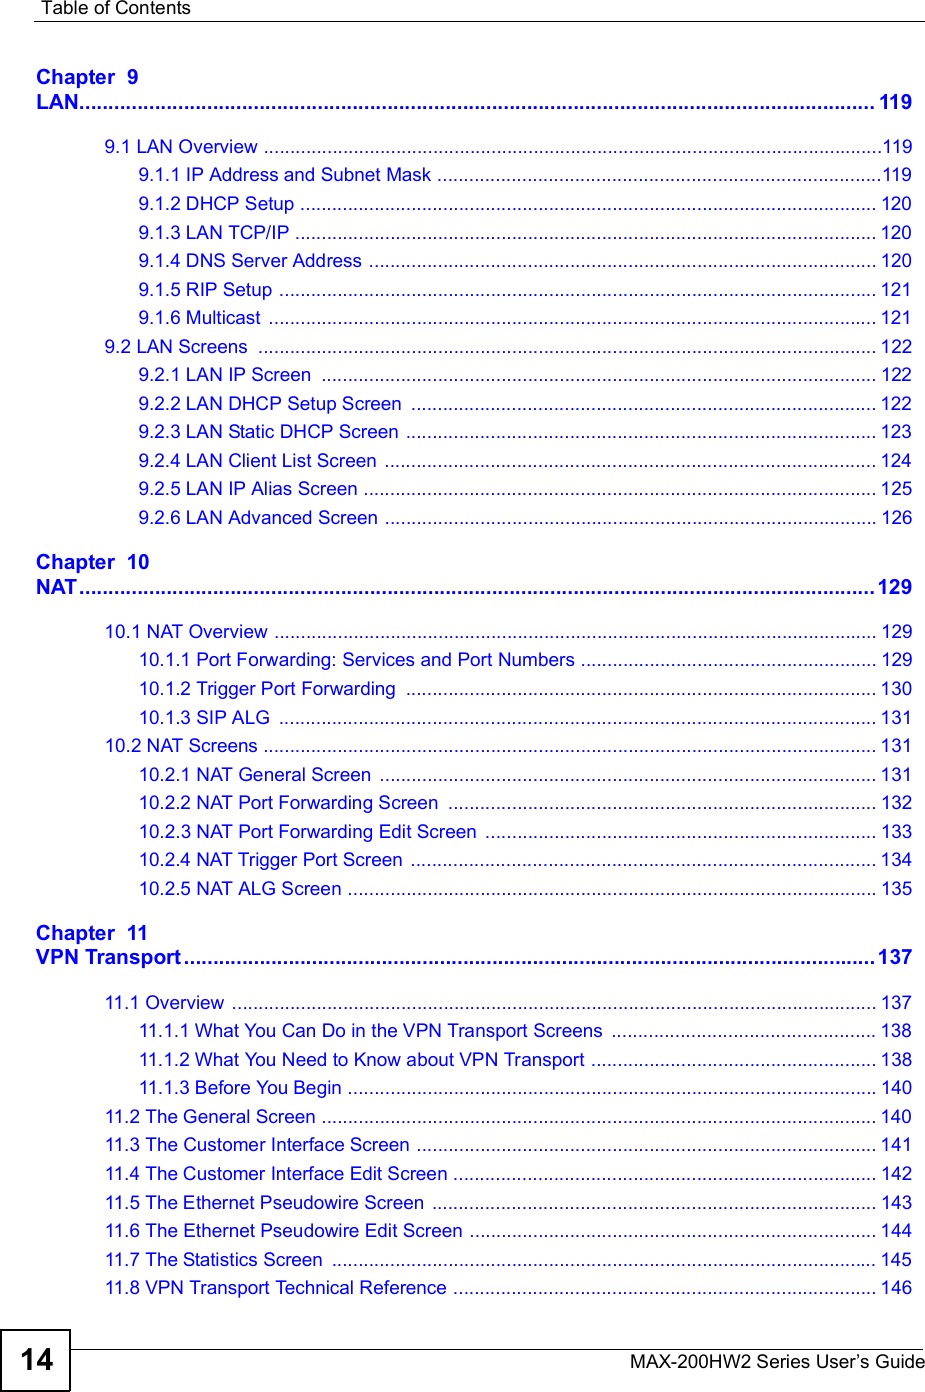 Table of ContentsMAX-200HW2 Series User s Guide14Chapter  9LAN.........................................................................................................................................1199.1 LAN Overview .....................................................................................................................1199.1.1 IP Address and Subnet Mask ....................................................................................1199.1.2 DHCP Setup .............................................................................................................1209.1.3 LAN TCP/IP ..............................................................................................................1209.1.4 DNS Server Address ................................................................................................1209.1.5 RIP Setup .................................................................................................................1219.1.6 Multicast ...................................................................................................................1219.2 LAN Screens .....................................................................................................................1229.2.1 LAN IP Screen .........................................................................................................1229.2.2 LAN DHCP Setup Screen ........................................................................................1229.2.3 LAN Static DHCP Screen .........................................................................................1239.2.4 LAN Client List Screen .............................................................................................1249.2.5 LAN IP Alias Screen .................................................................................................1259.2.6 LAN Advanced Screen .............................................................................................126Chapter  10NAT.........................................................................................................................................12910.1 NAT Overview ..................................................................................................................12910.1.1 Port Forwarding: Services and Port Numbers ........................................................12910.1.2 Trigger Port Forwarding .........................................................................................13010.1.3 SIP ALG .................................................................................................................13110.2 NAT Screens ....................................................................................................................13110.2.1 NAT General Screen ..............................................................................................13110.2.2 NAT Port Forwarding Screen .................................................................................13210.2.3 NAT Port Forwarding Edit Screen ..........................................................................13310.2.4 NAT Trigger Port Screen ........................................................................................13410.2.5 NAT ALG Screen ....................................................................................................135Chapter  11VPN Transport.......................................................................................................................13711.1 Overview ..........................................................................................................................13711.1.1 What You Can Do in the VPN Transport Screens ..................................................13811.1.2 What You Need to Know about VPN Transport ......................................................13811.1.3 Before You Begin ....................................................................................................14011.2 The General Screen .........................................................................................................14011.3 The Customer Interface Screen .......................................................................................14111.4 The Customer Interface Edit Screen ................................................................................14211.5 The Ethernet Pseudowire Screen ....................................................................................14311.6 The Ethernet Pseudowire Edit Screen .............................................................................14411.7 The Statistics Screen .......................................................................................................14511.8 VPN Transport Technical Reference ................................................................................146